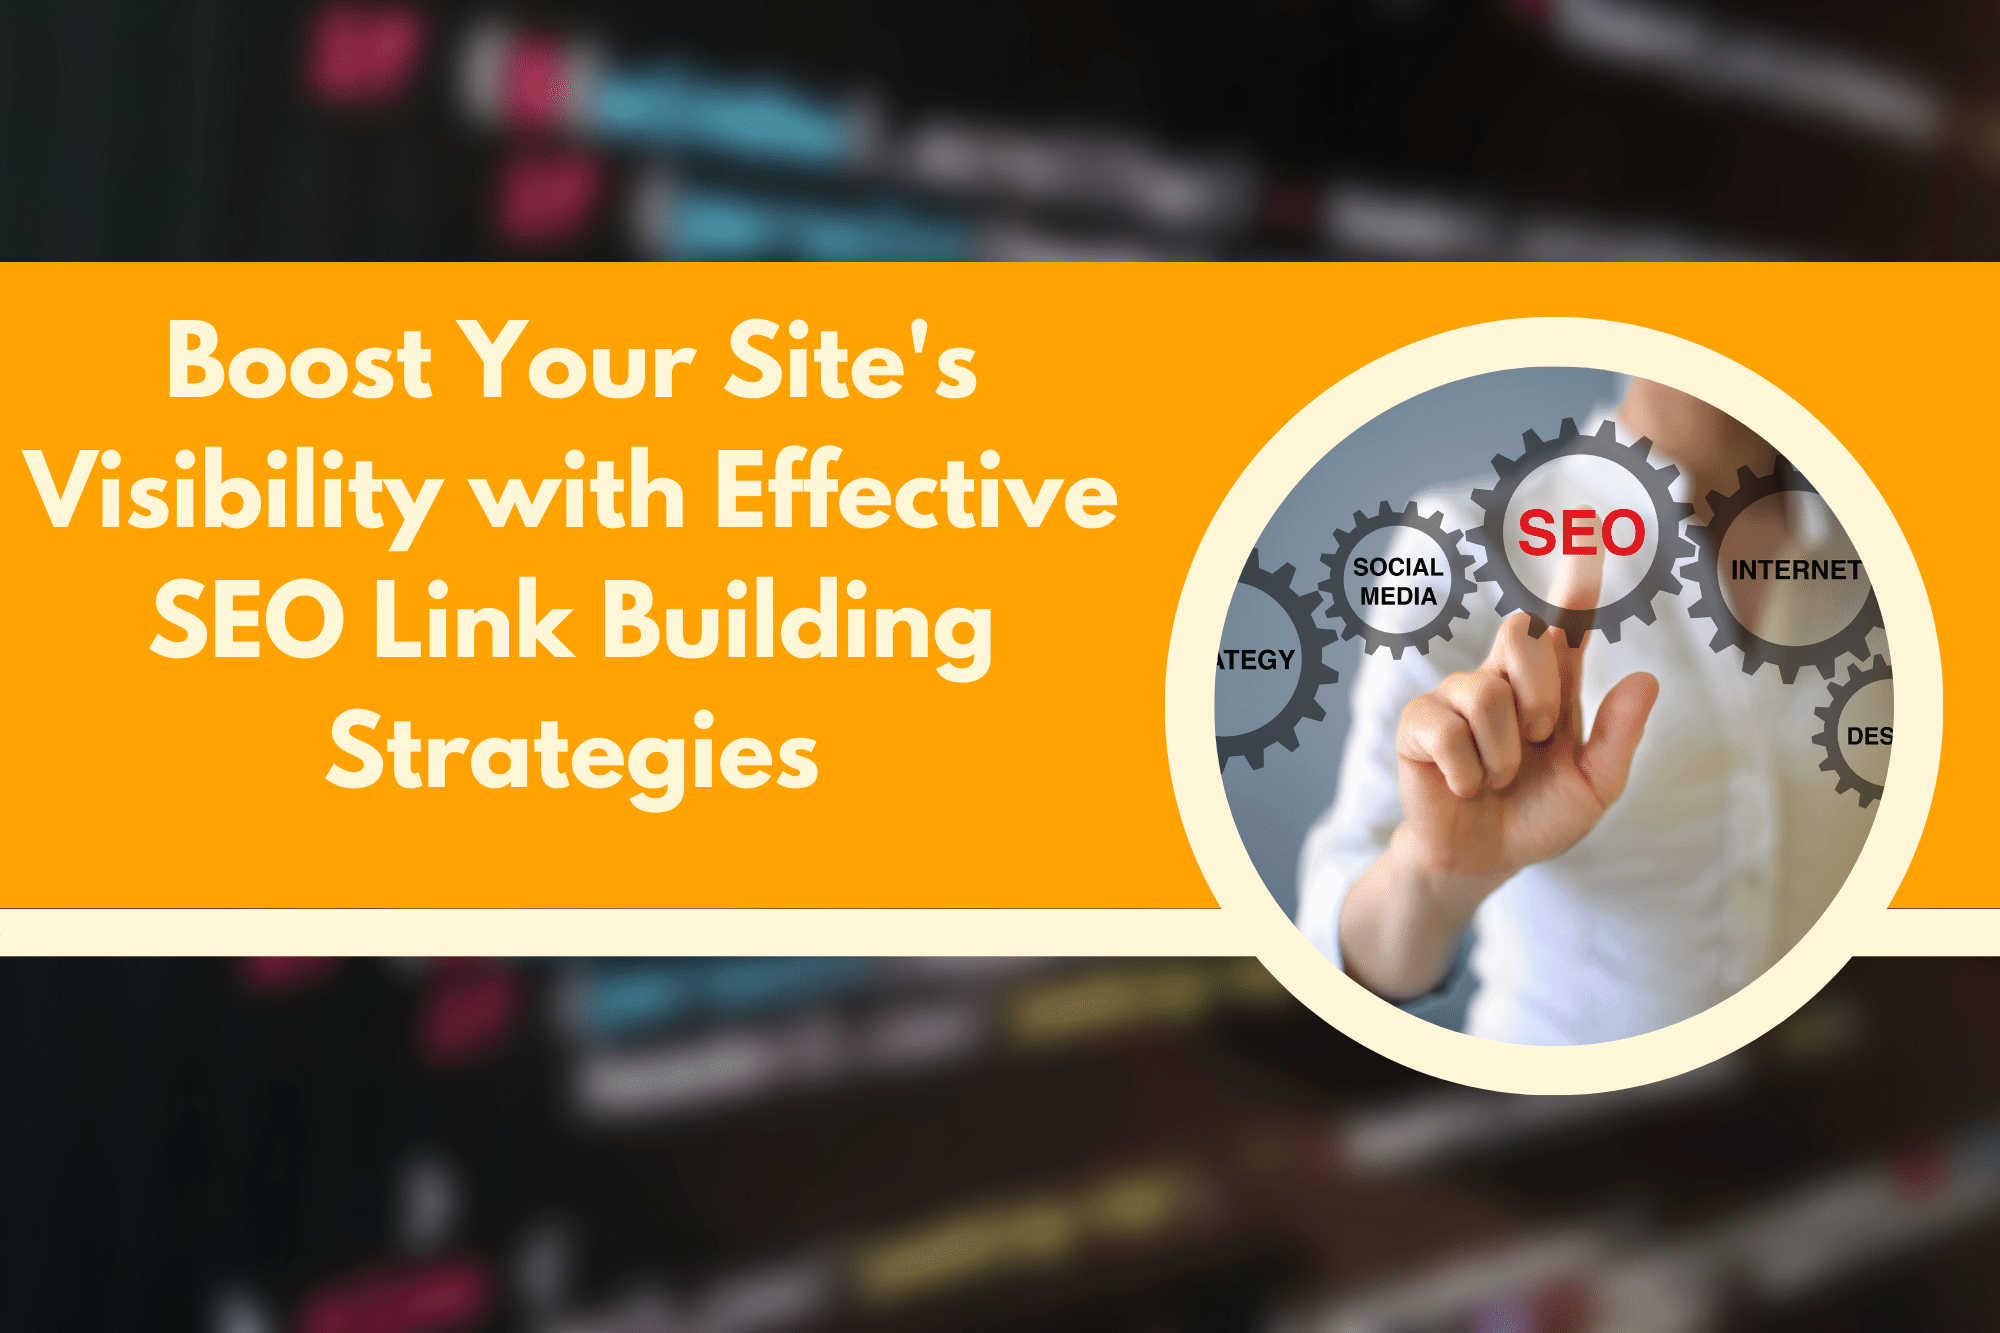 Boost Your Site's Visibility with Effective SEO Link Building Strategies